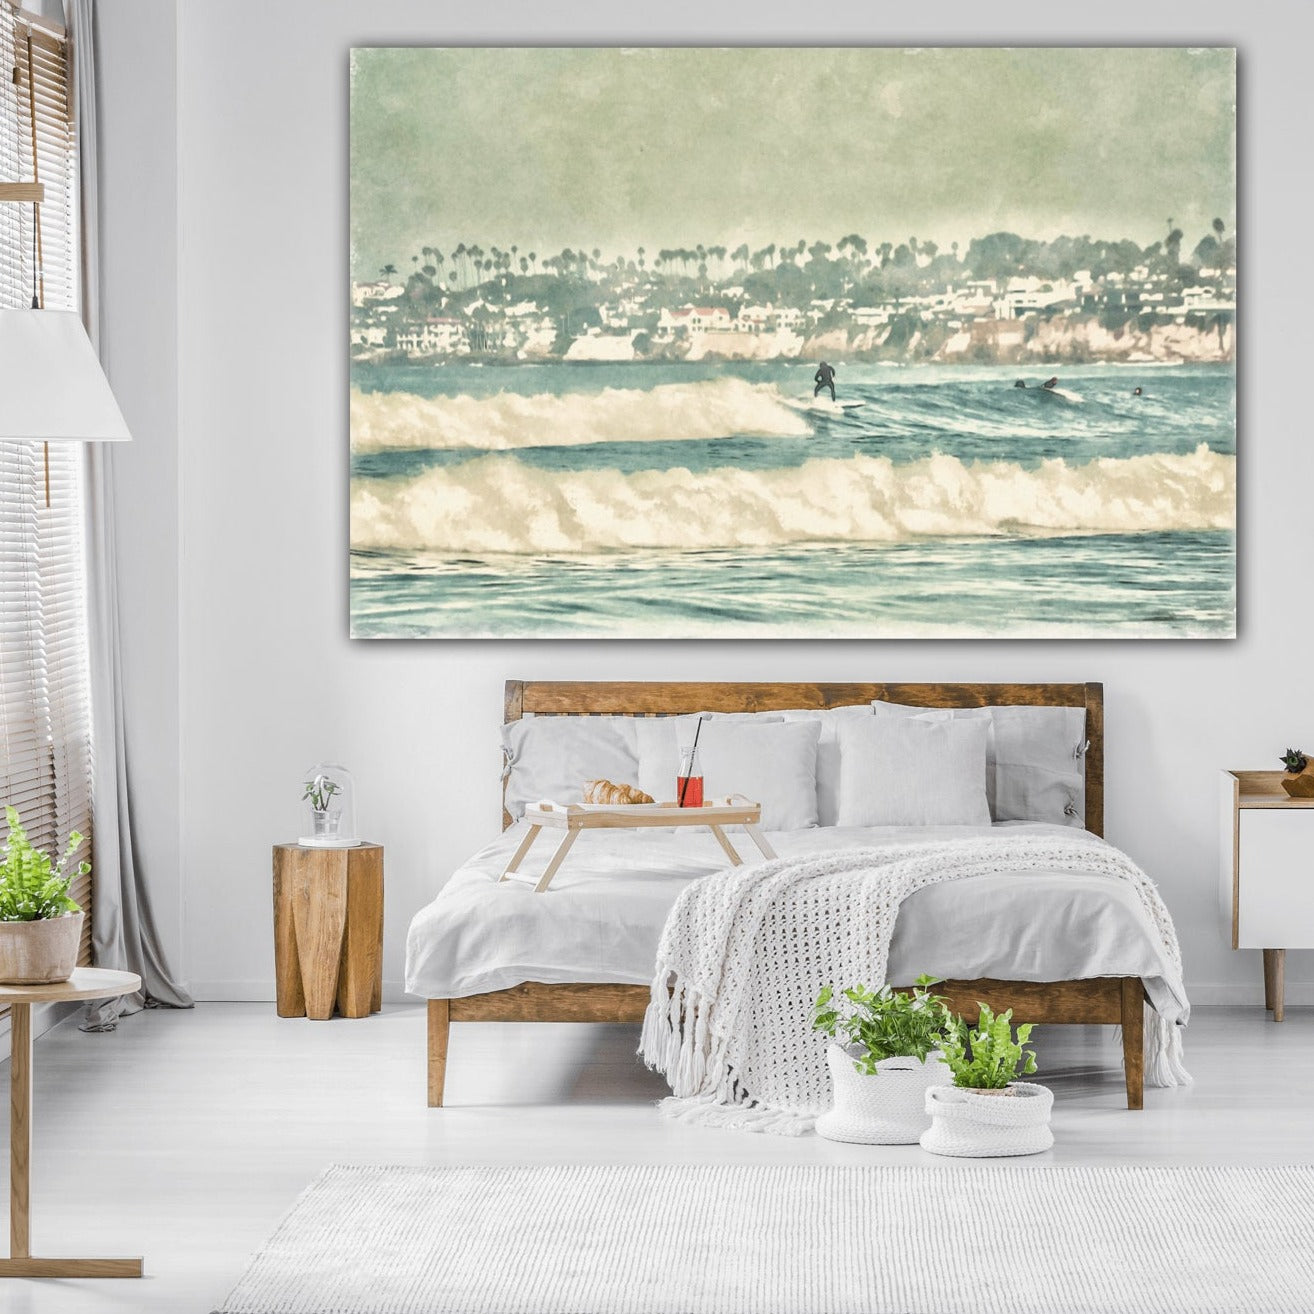 surfing the waves bedroom decor canvas print by Jacqueline MB Designs 